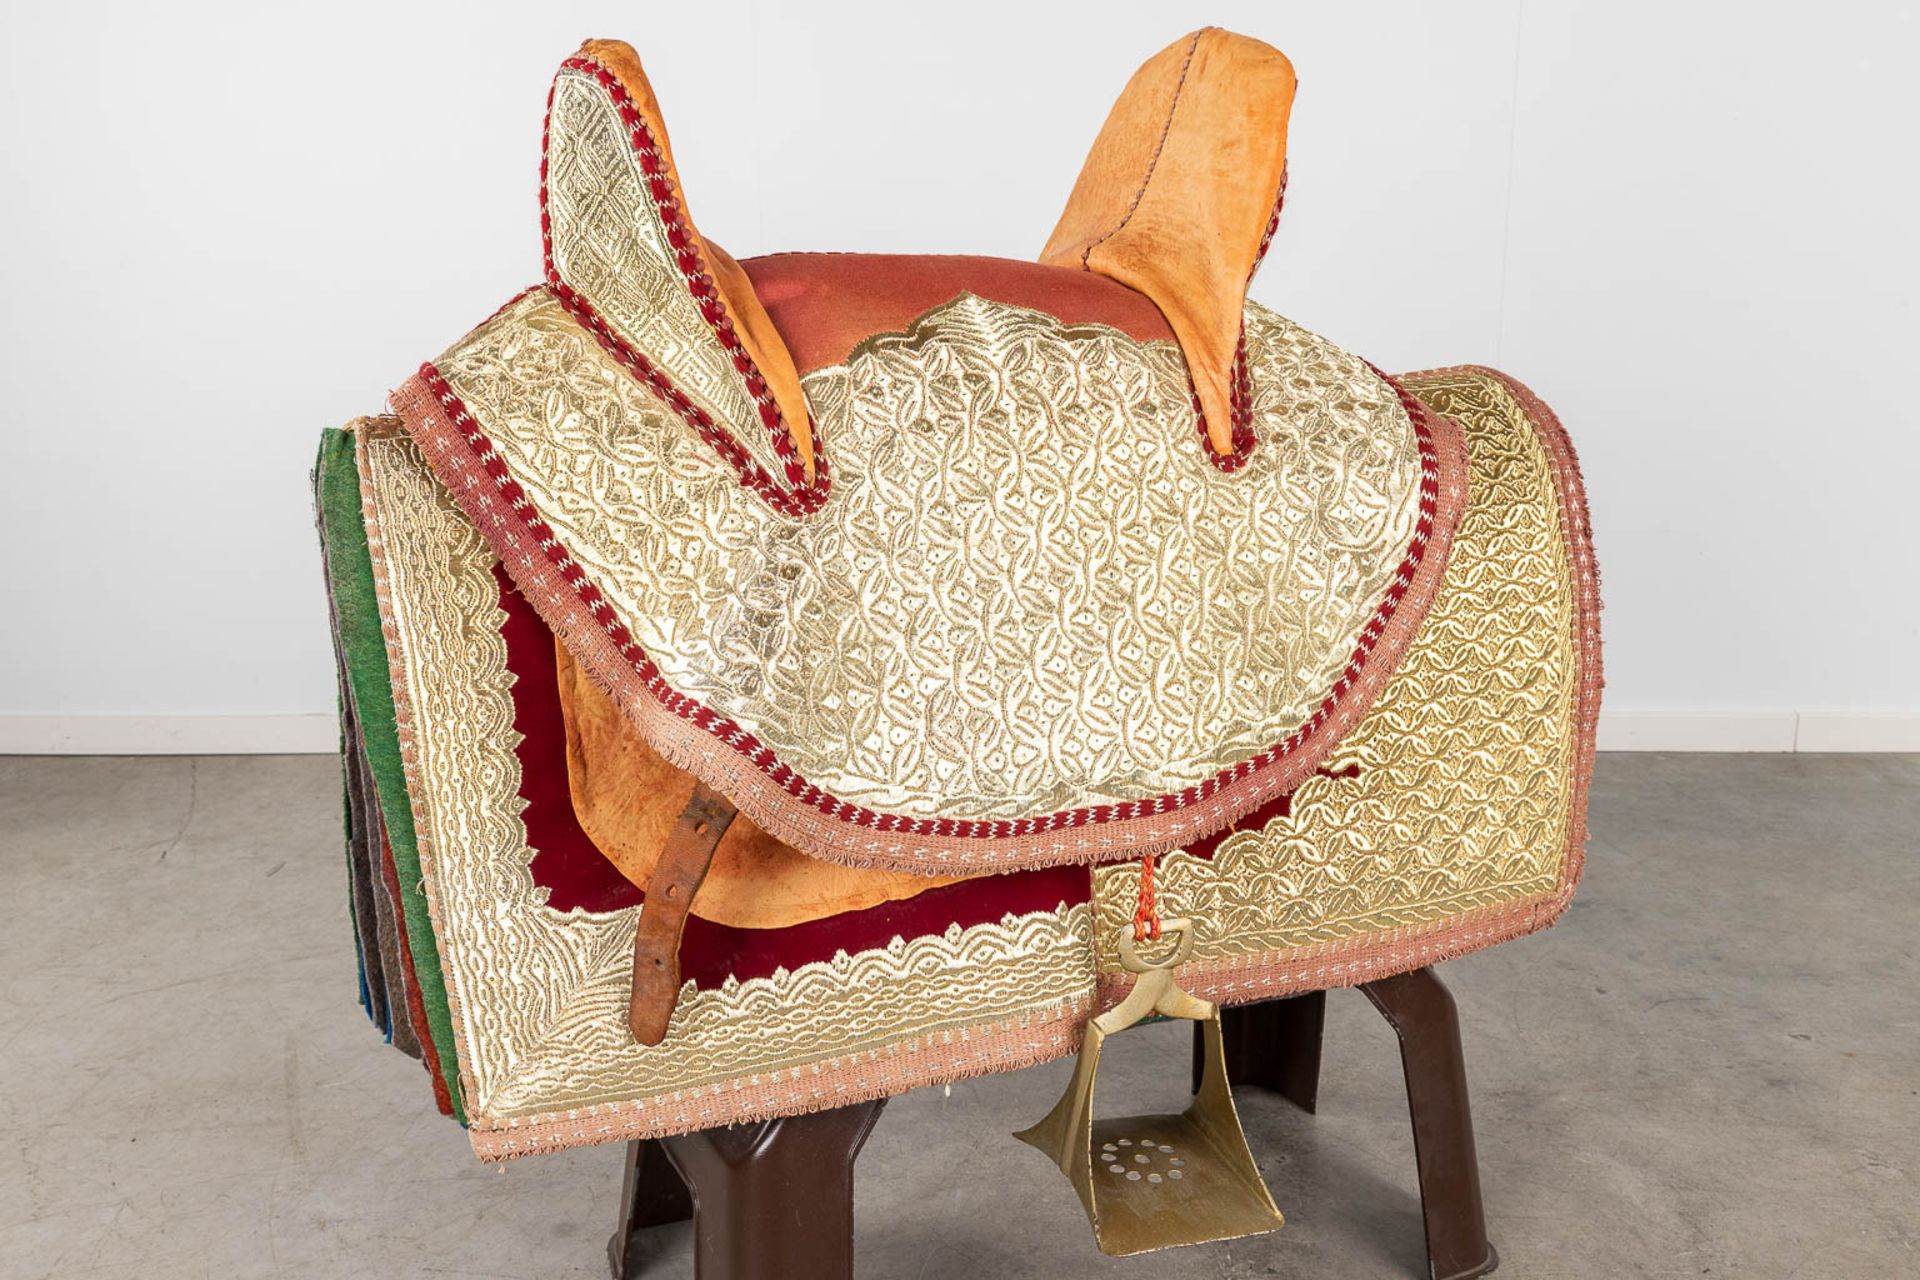 An antique 'Fantasia' saddle, made of camel leather. (W: 100 x H: 70 cm) - Image 10 of 13